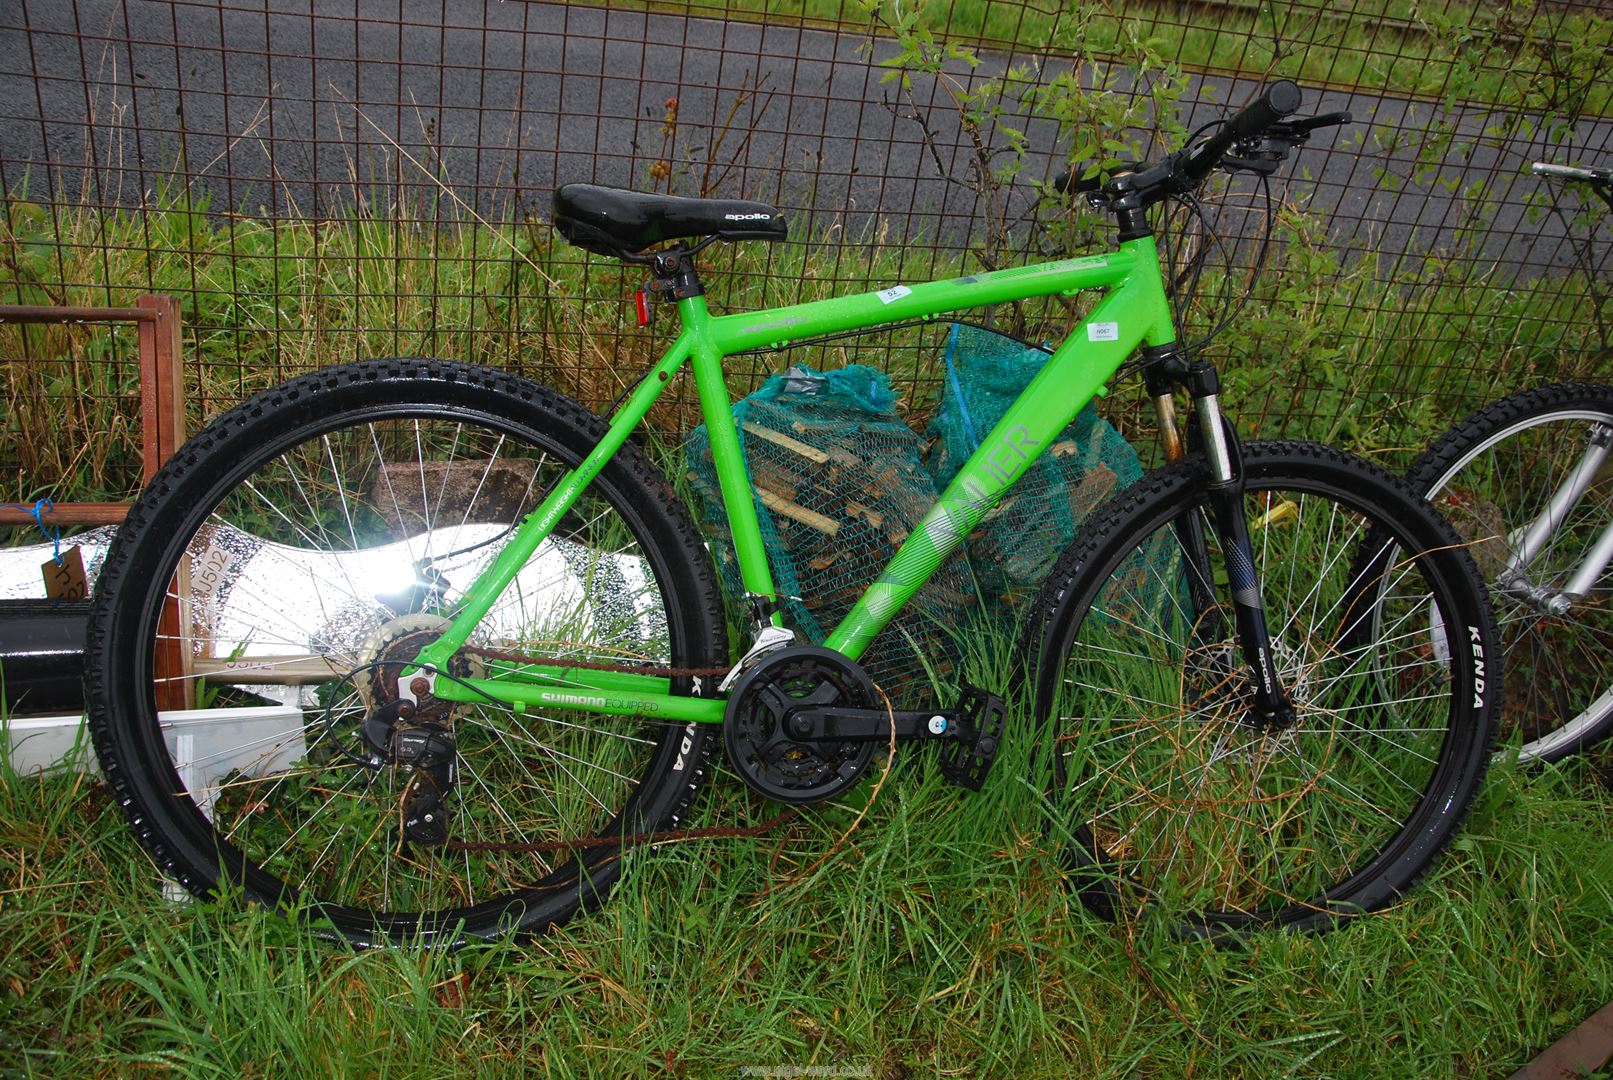 A valier bike 18 speed with disc brakes.